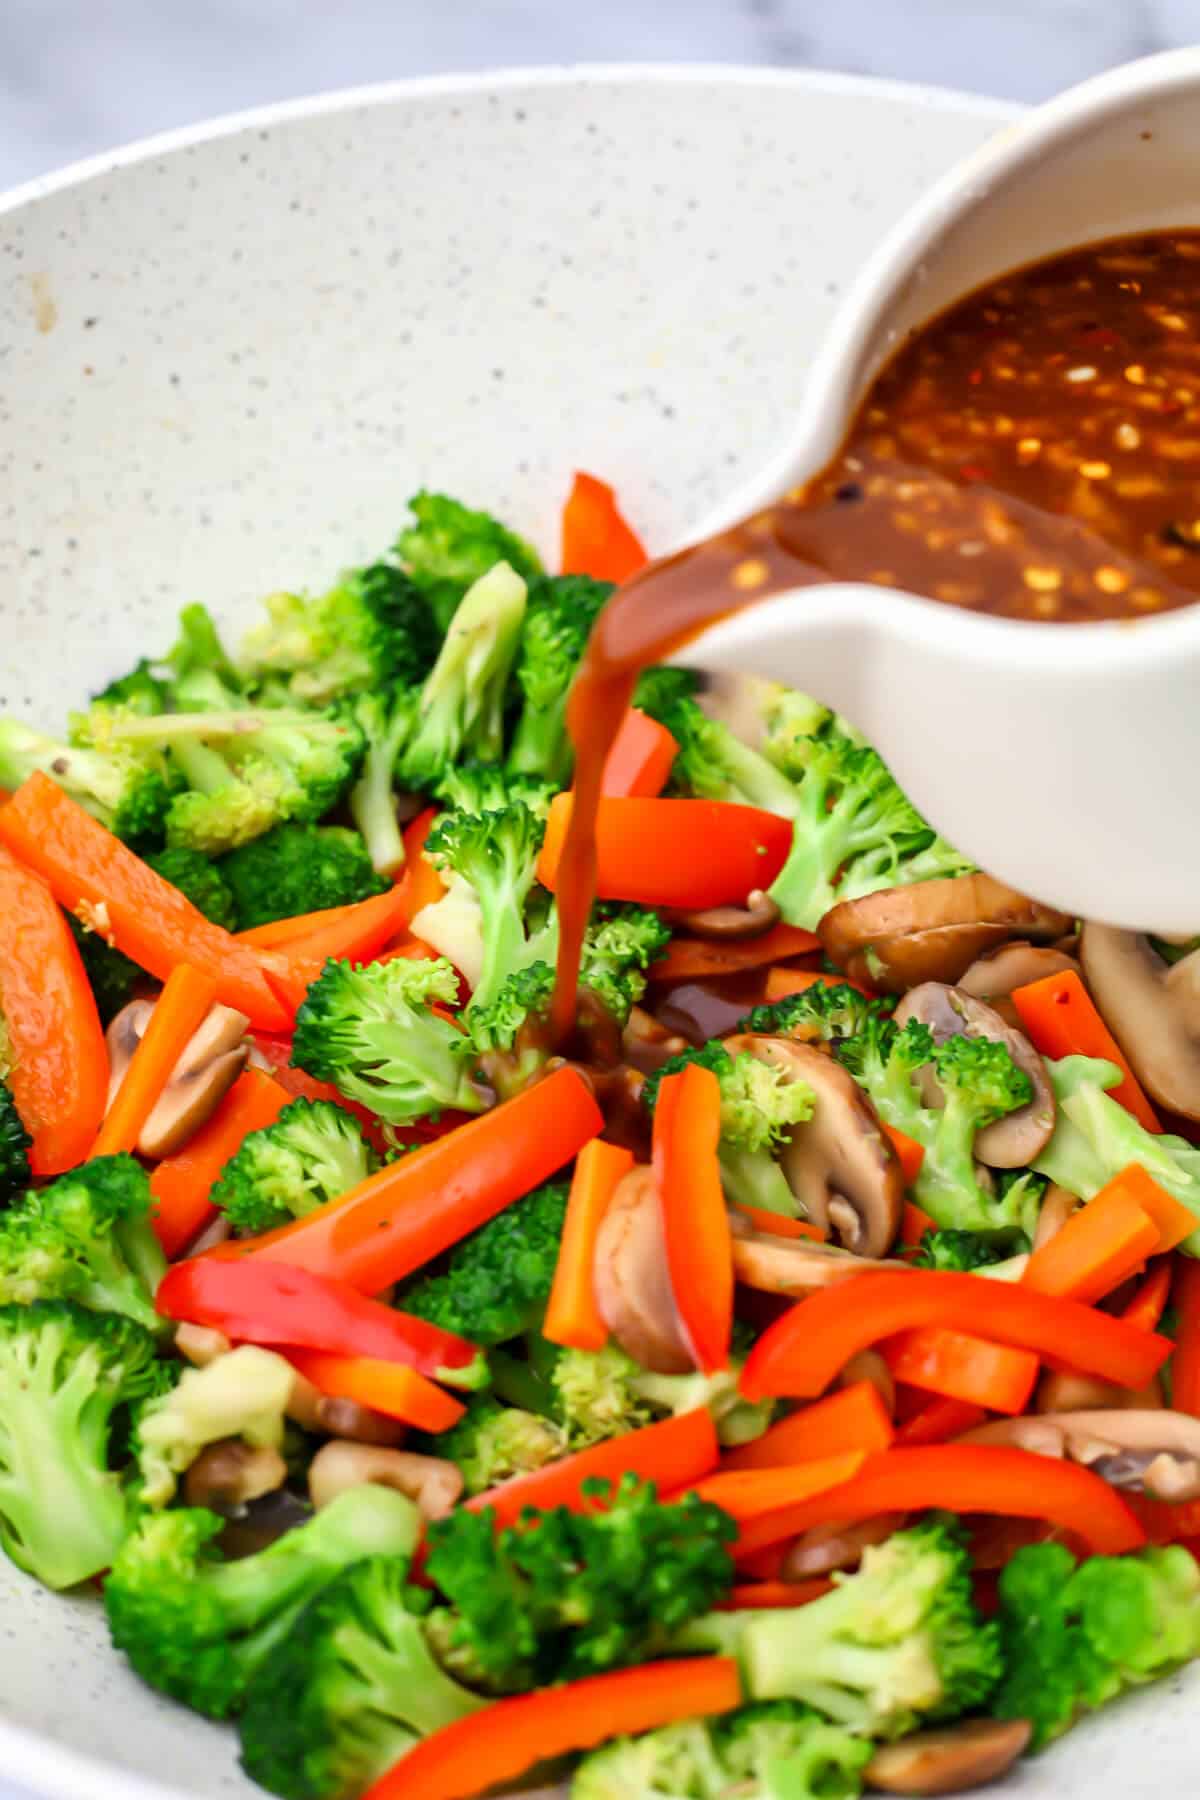 Stir-fry sauce being poured over stir-fried veggies in a wok.